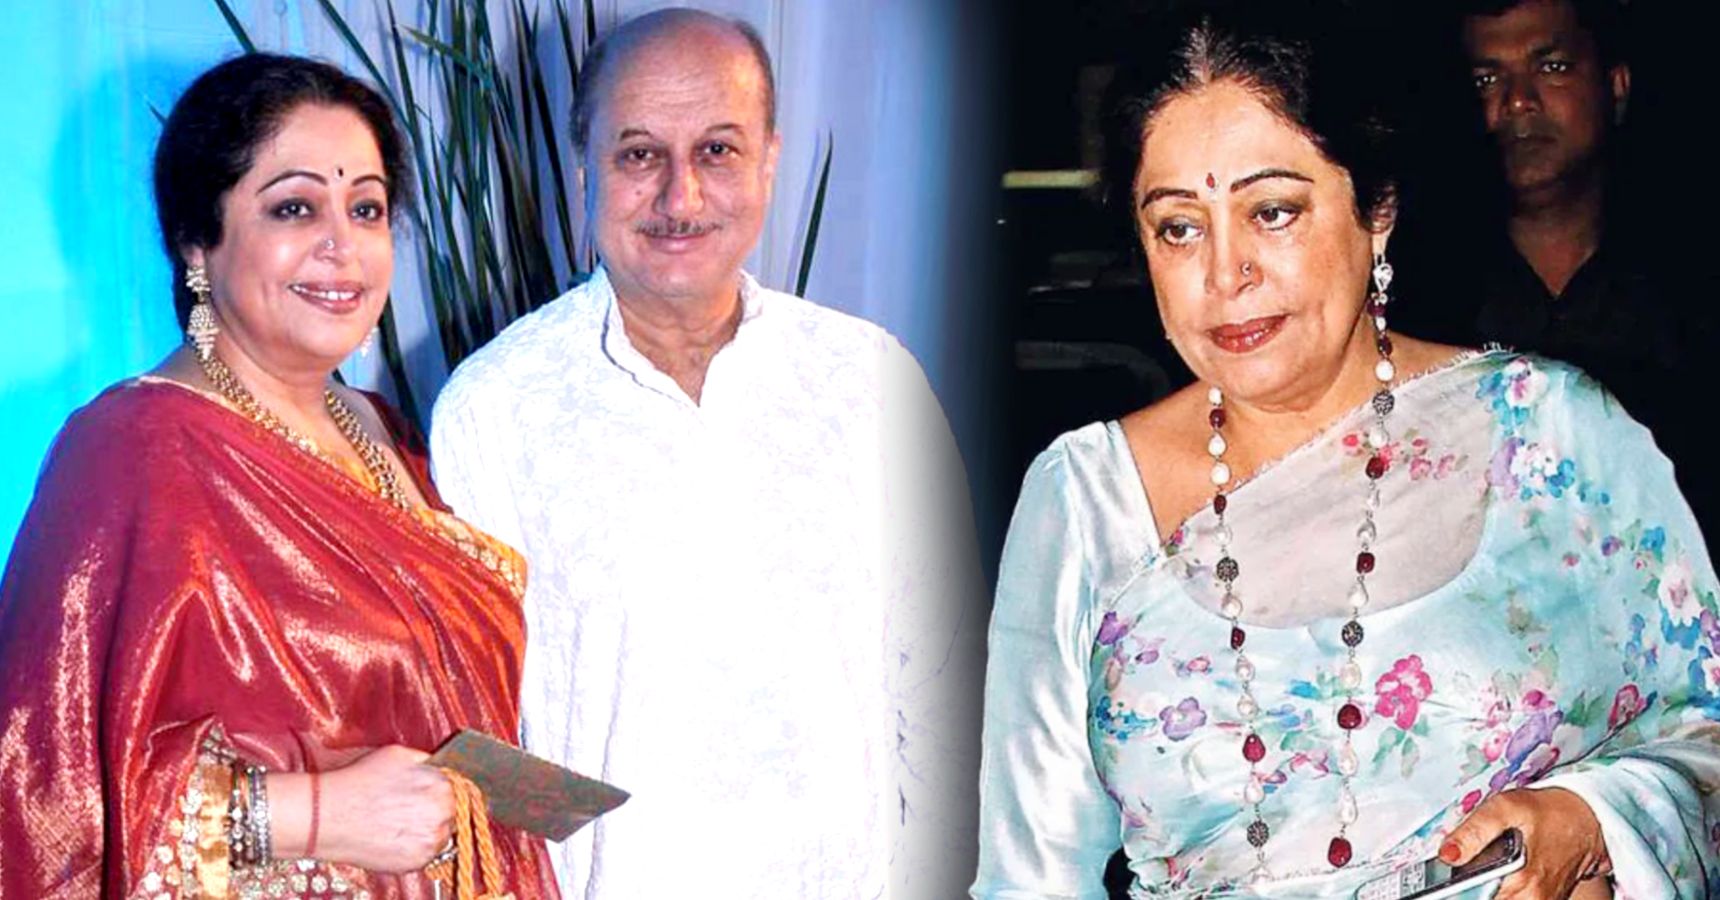 Veteran Bollywood actress Kirron Kher tests positive for Covid 19